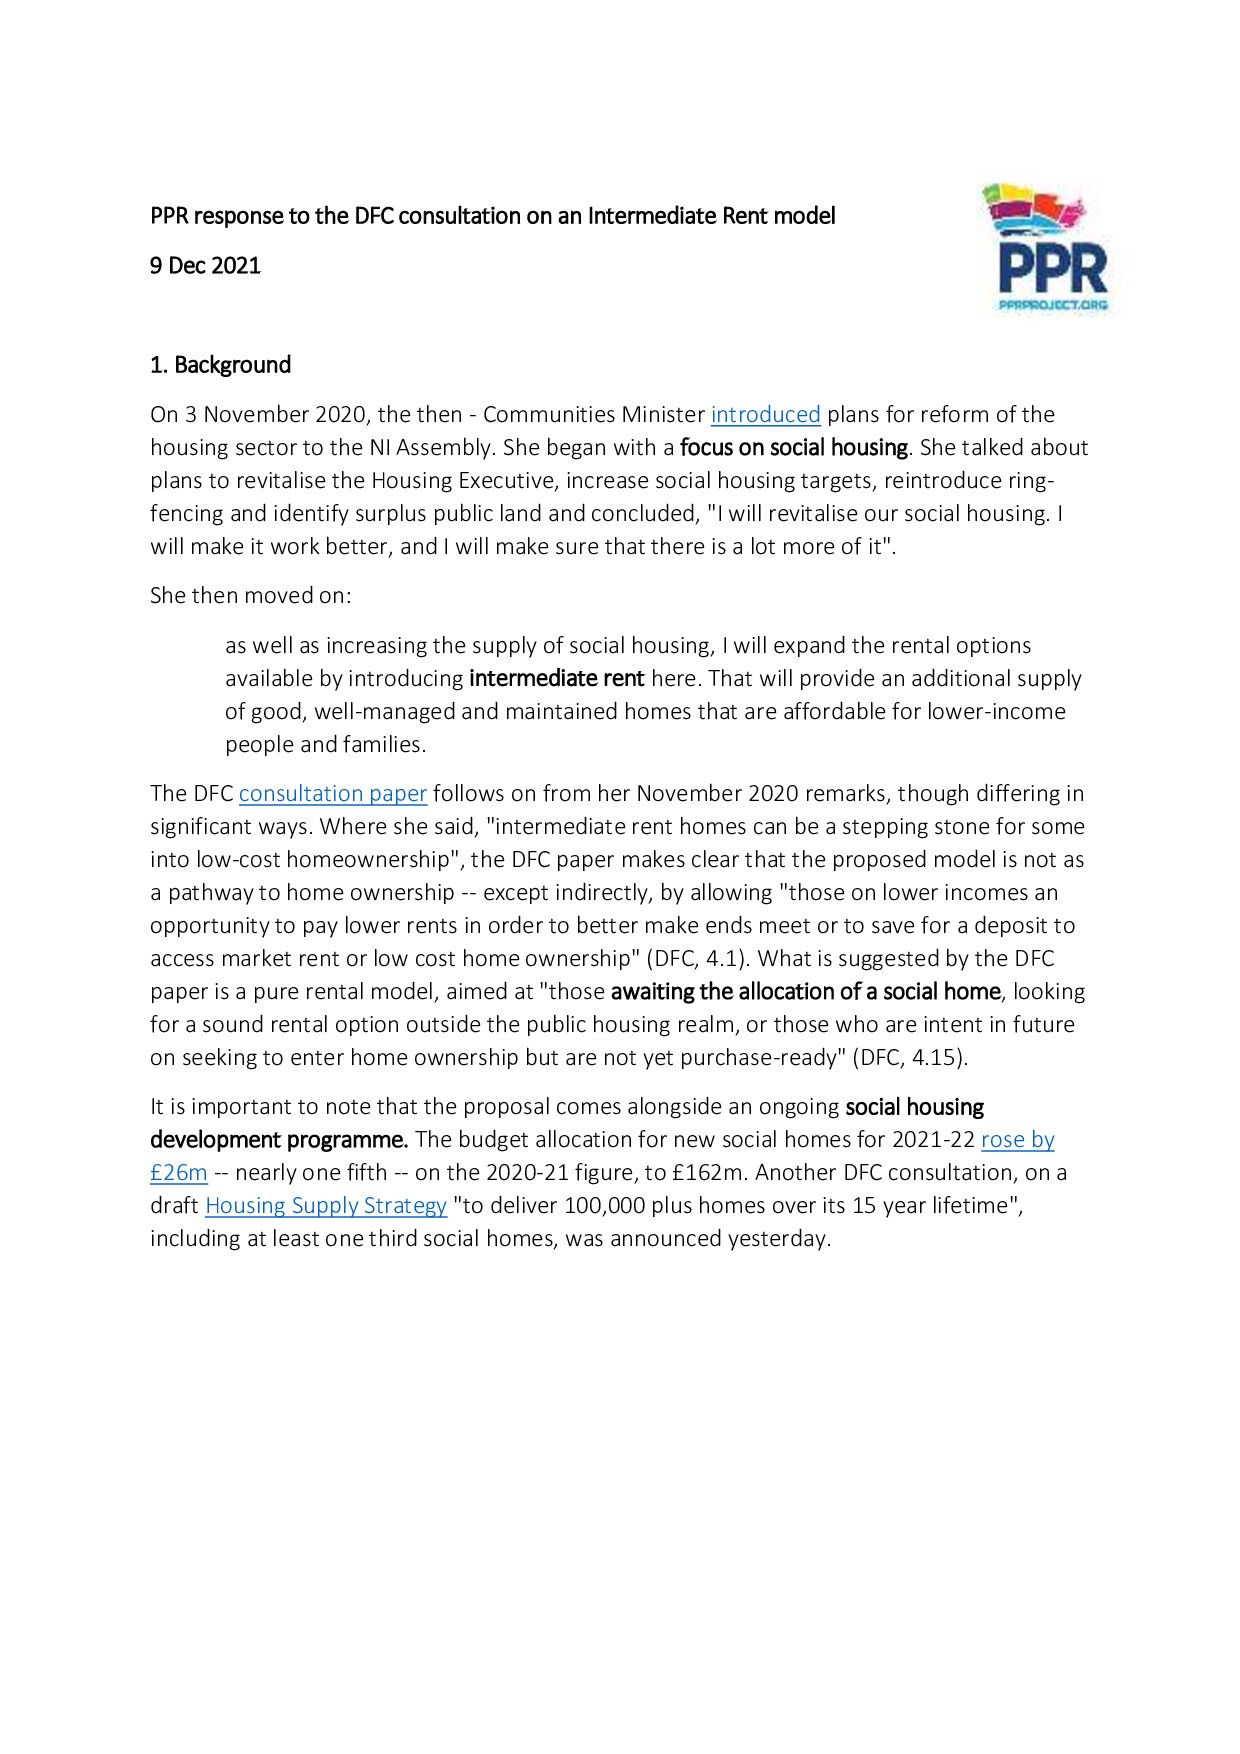 PPR's Response to the Department for Communities' Consultation on an Intermediate Rent Model